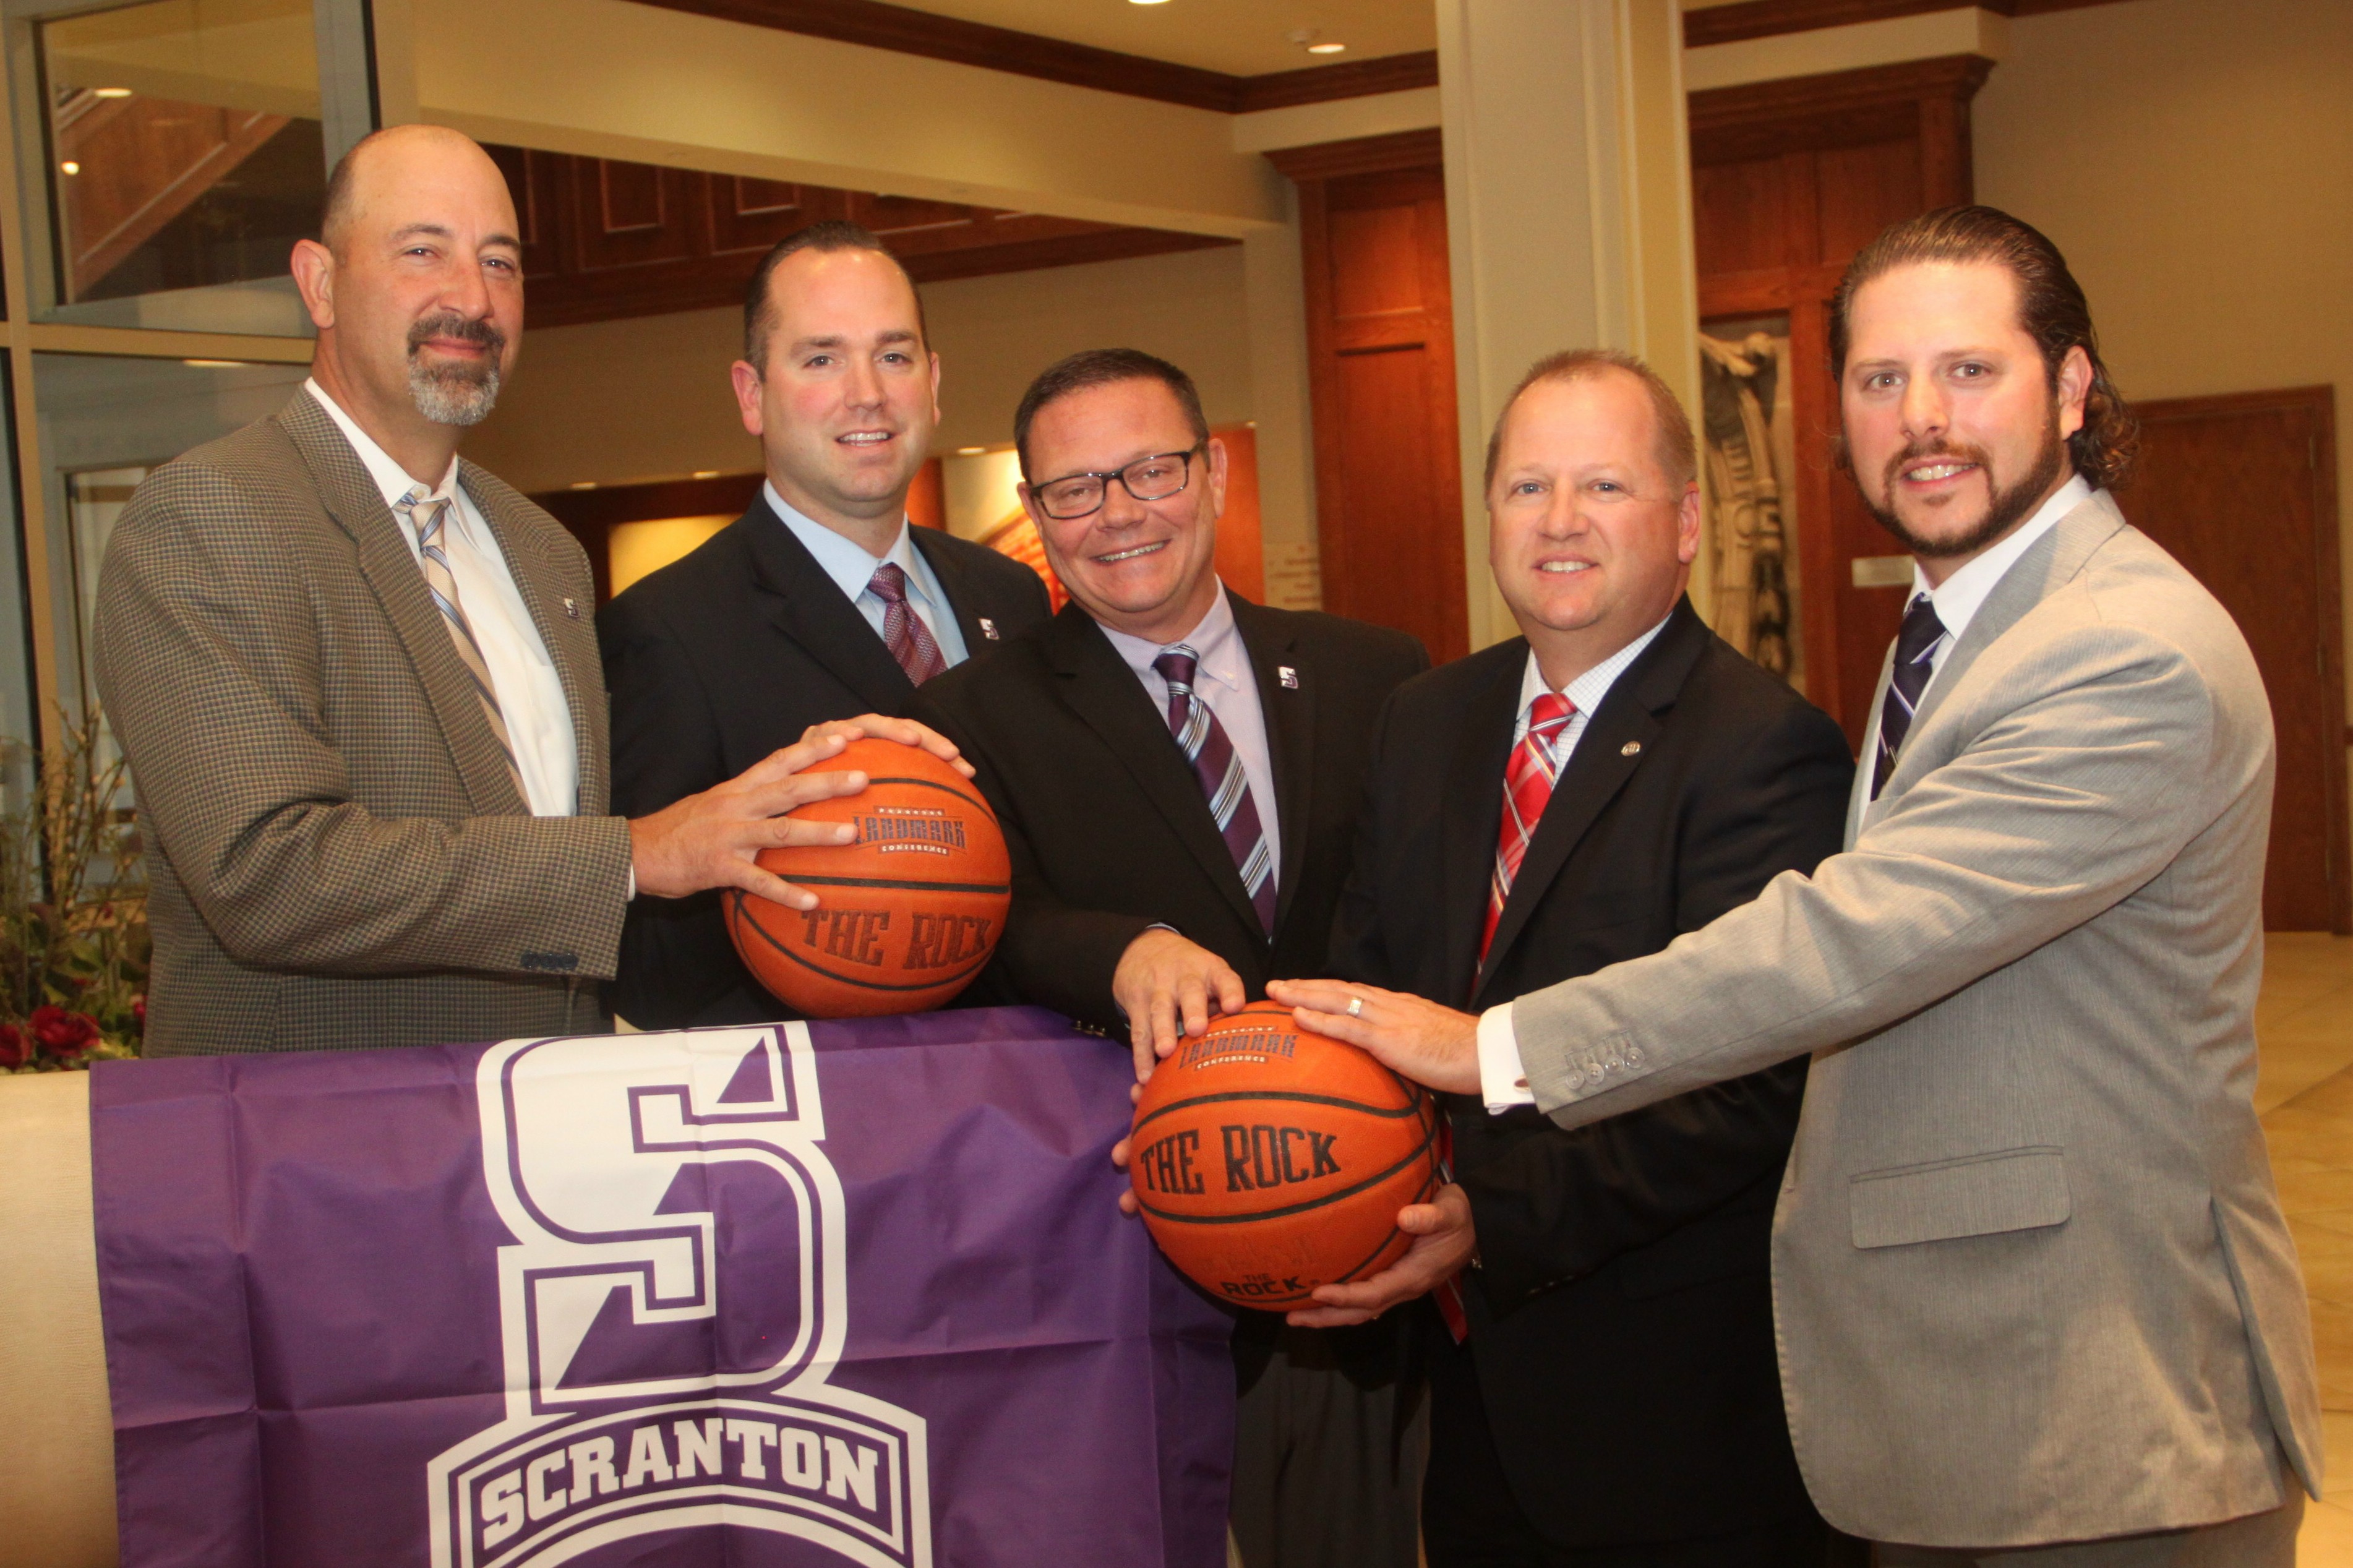 The Hilton Scranton and Conference Center is the lead sponsor of University of Scranton’s Athletics for the 2015-16 season, which includes the Hilton Scranton Invitational on Nov. 13 and 14 and the Hilton Poinsettia Classic on Dec. 15 and 16. From left, representing The University of Scranton, are: Carl Danzig, men’s head basketball coach; Trevor Woodruff, Lady Royals head basketball coach, and Dave Martin, director of athletics; and, representing Hilton Scranton and Conference Center, are John Argonish, general manager, and Ryan Alpert, director of sales and marketing.